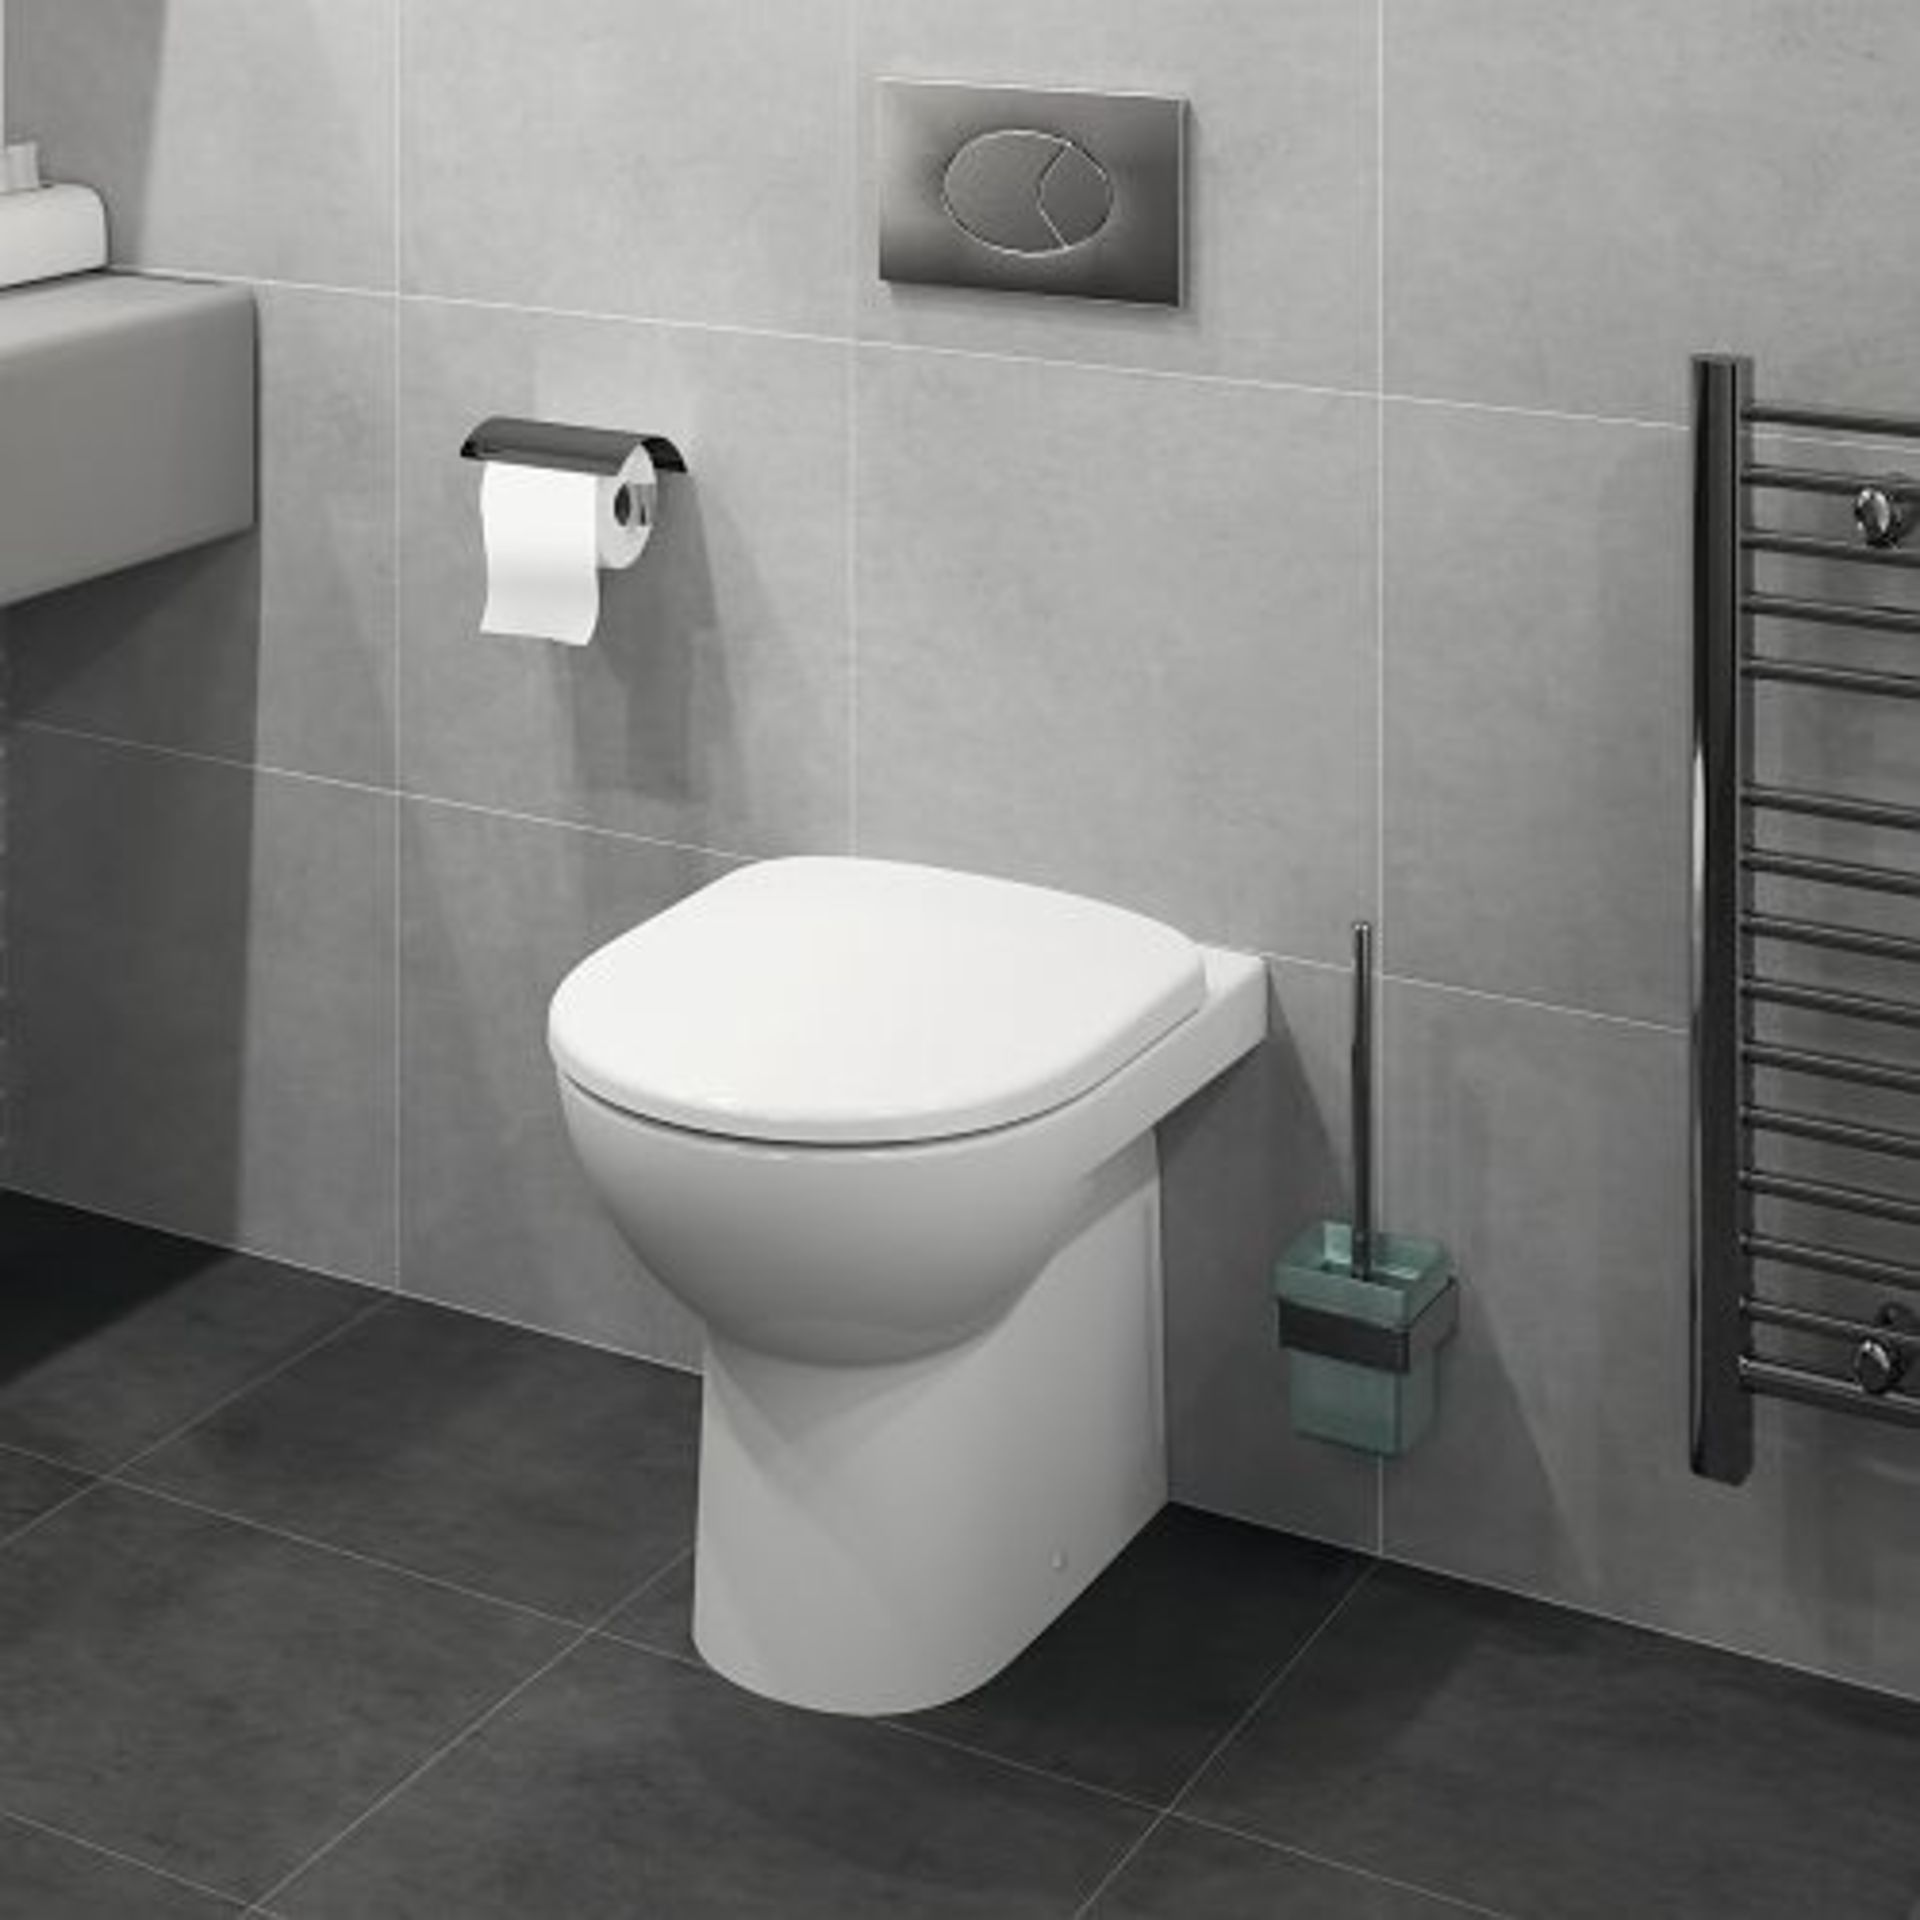 Twyford E500 Round Back to Wall Toilet RRP £200 - Image 2 of 3